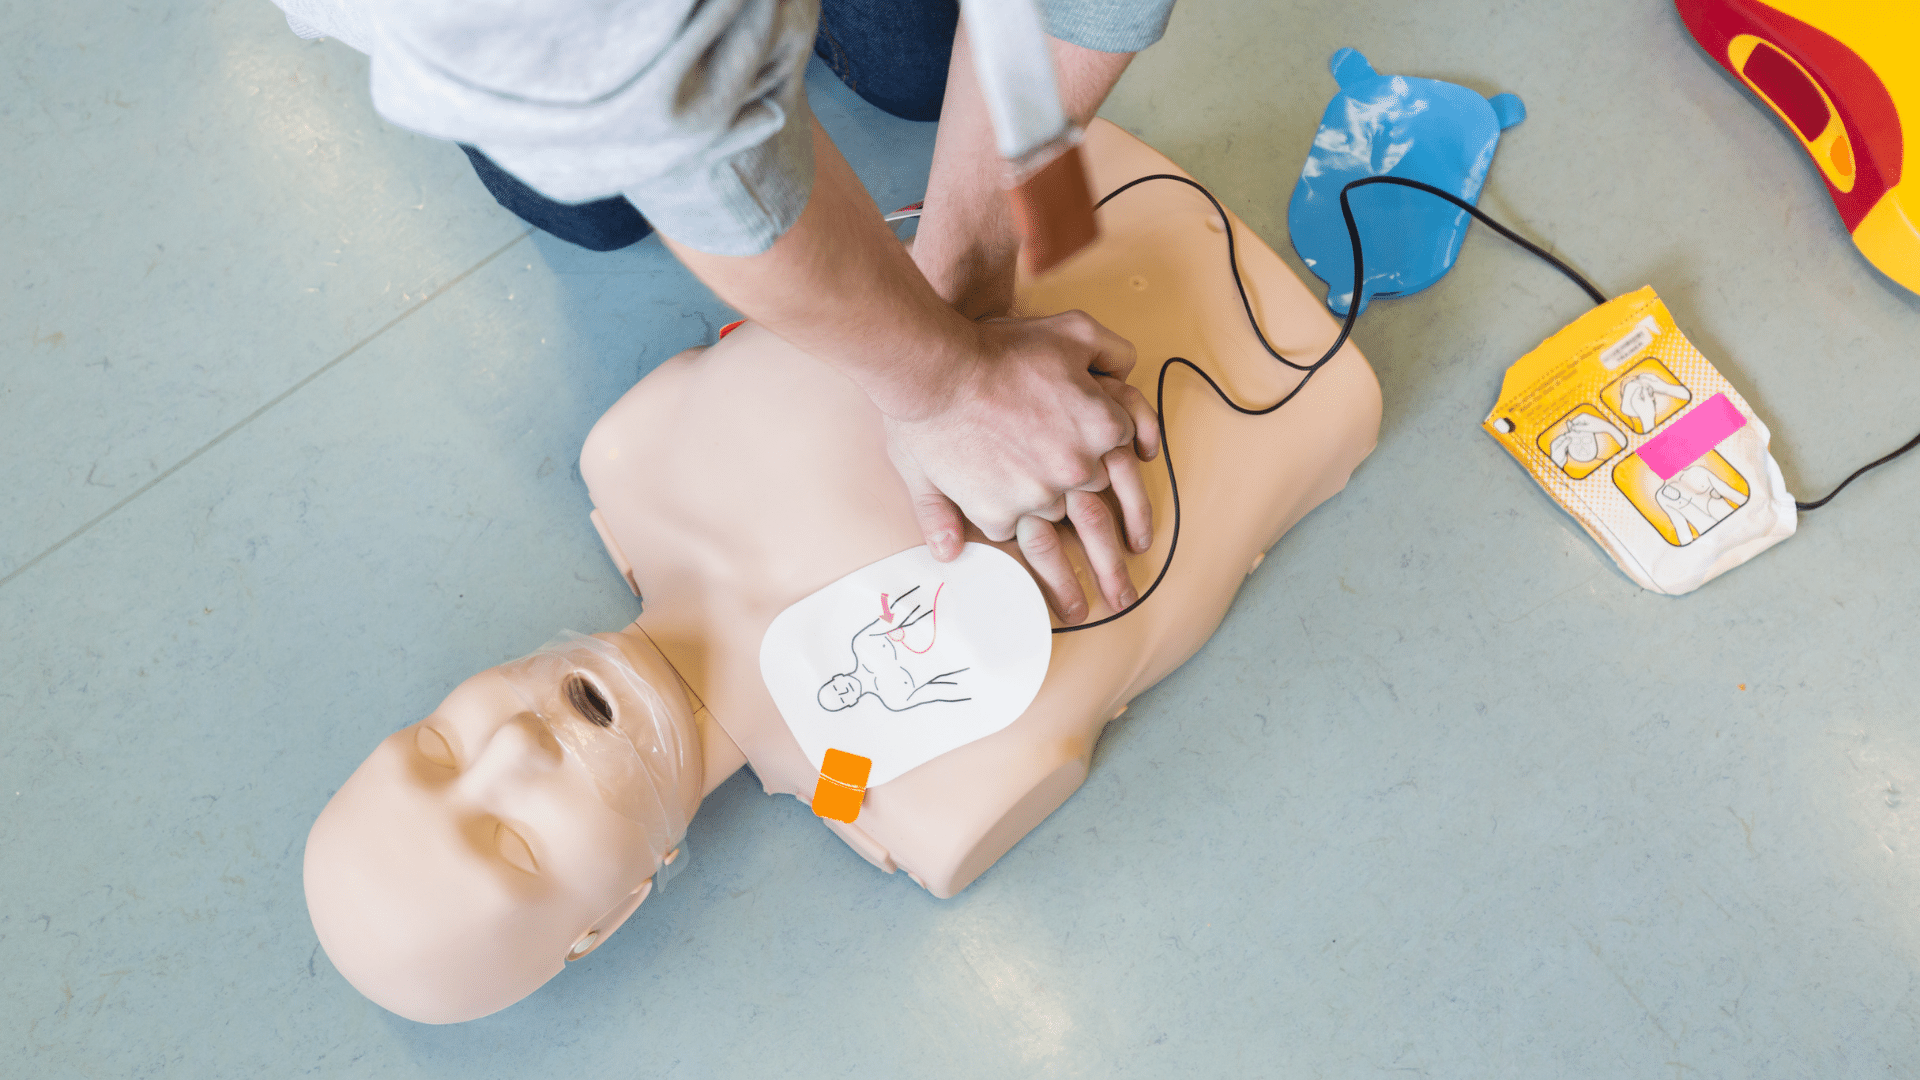 CPR on a dummy.